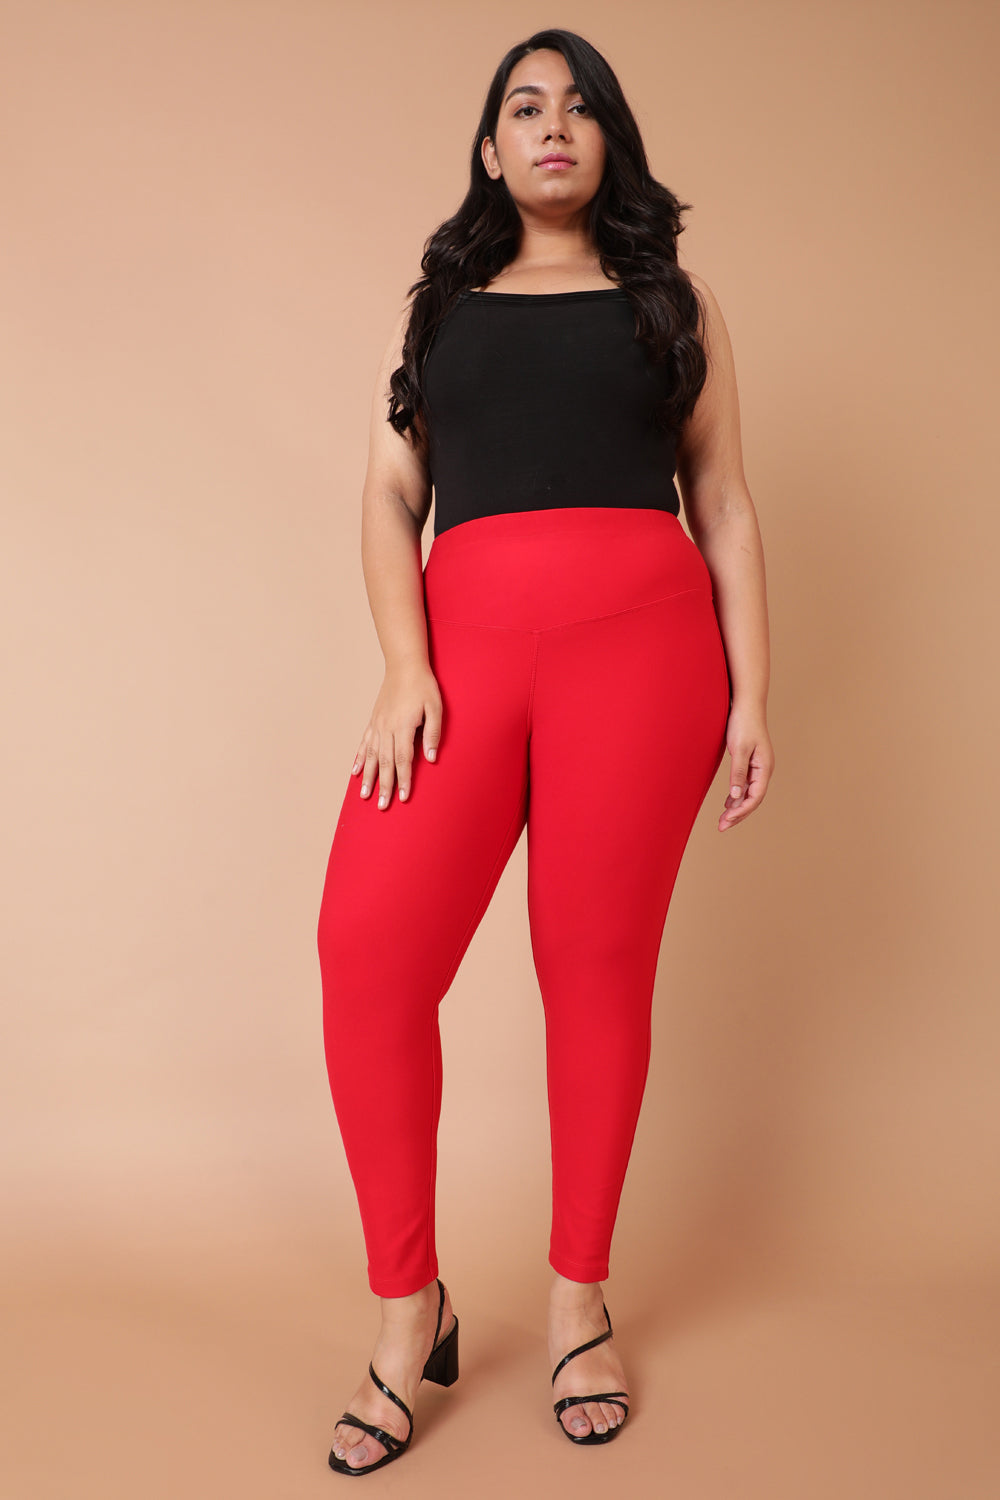 Tight Plus Size Red Tights & Leggings.